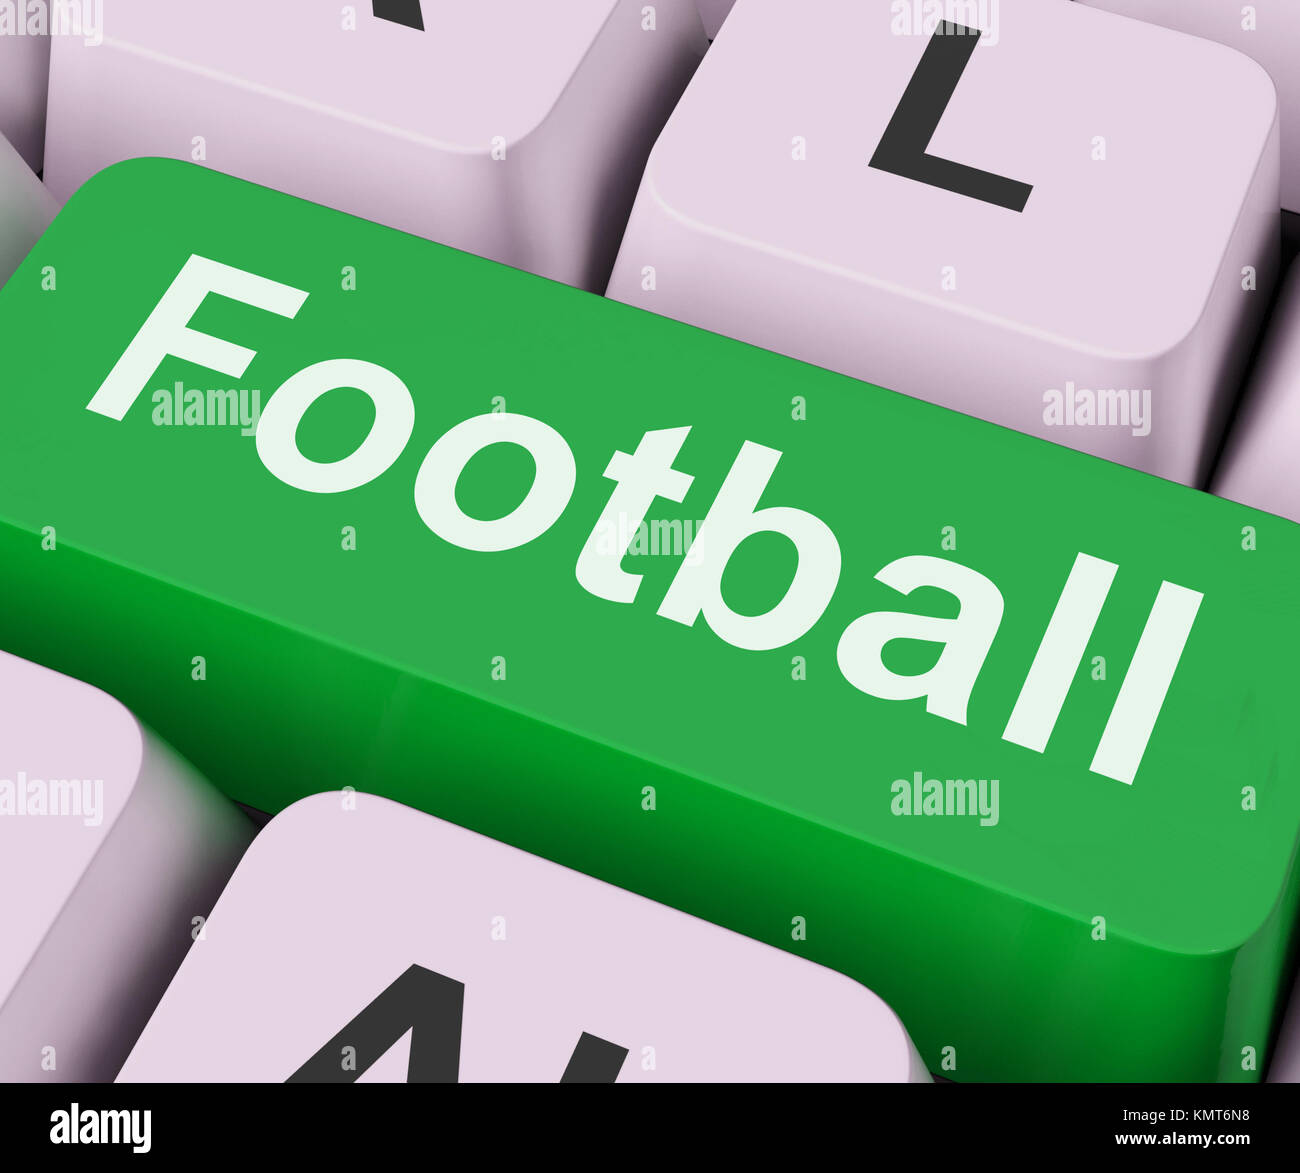 Football Key On Keyboard Meaning American Rugby Or Soccer Stock Photo